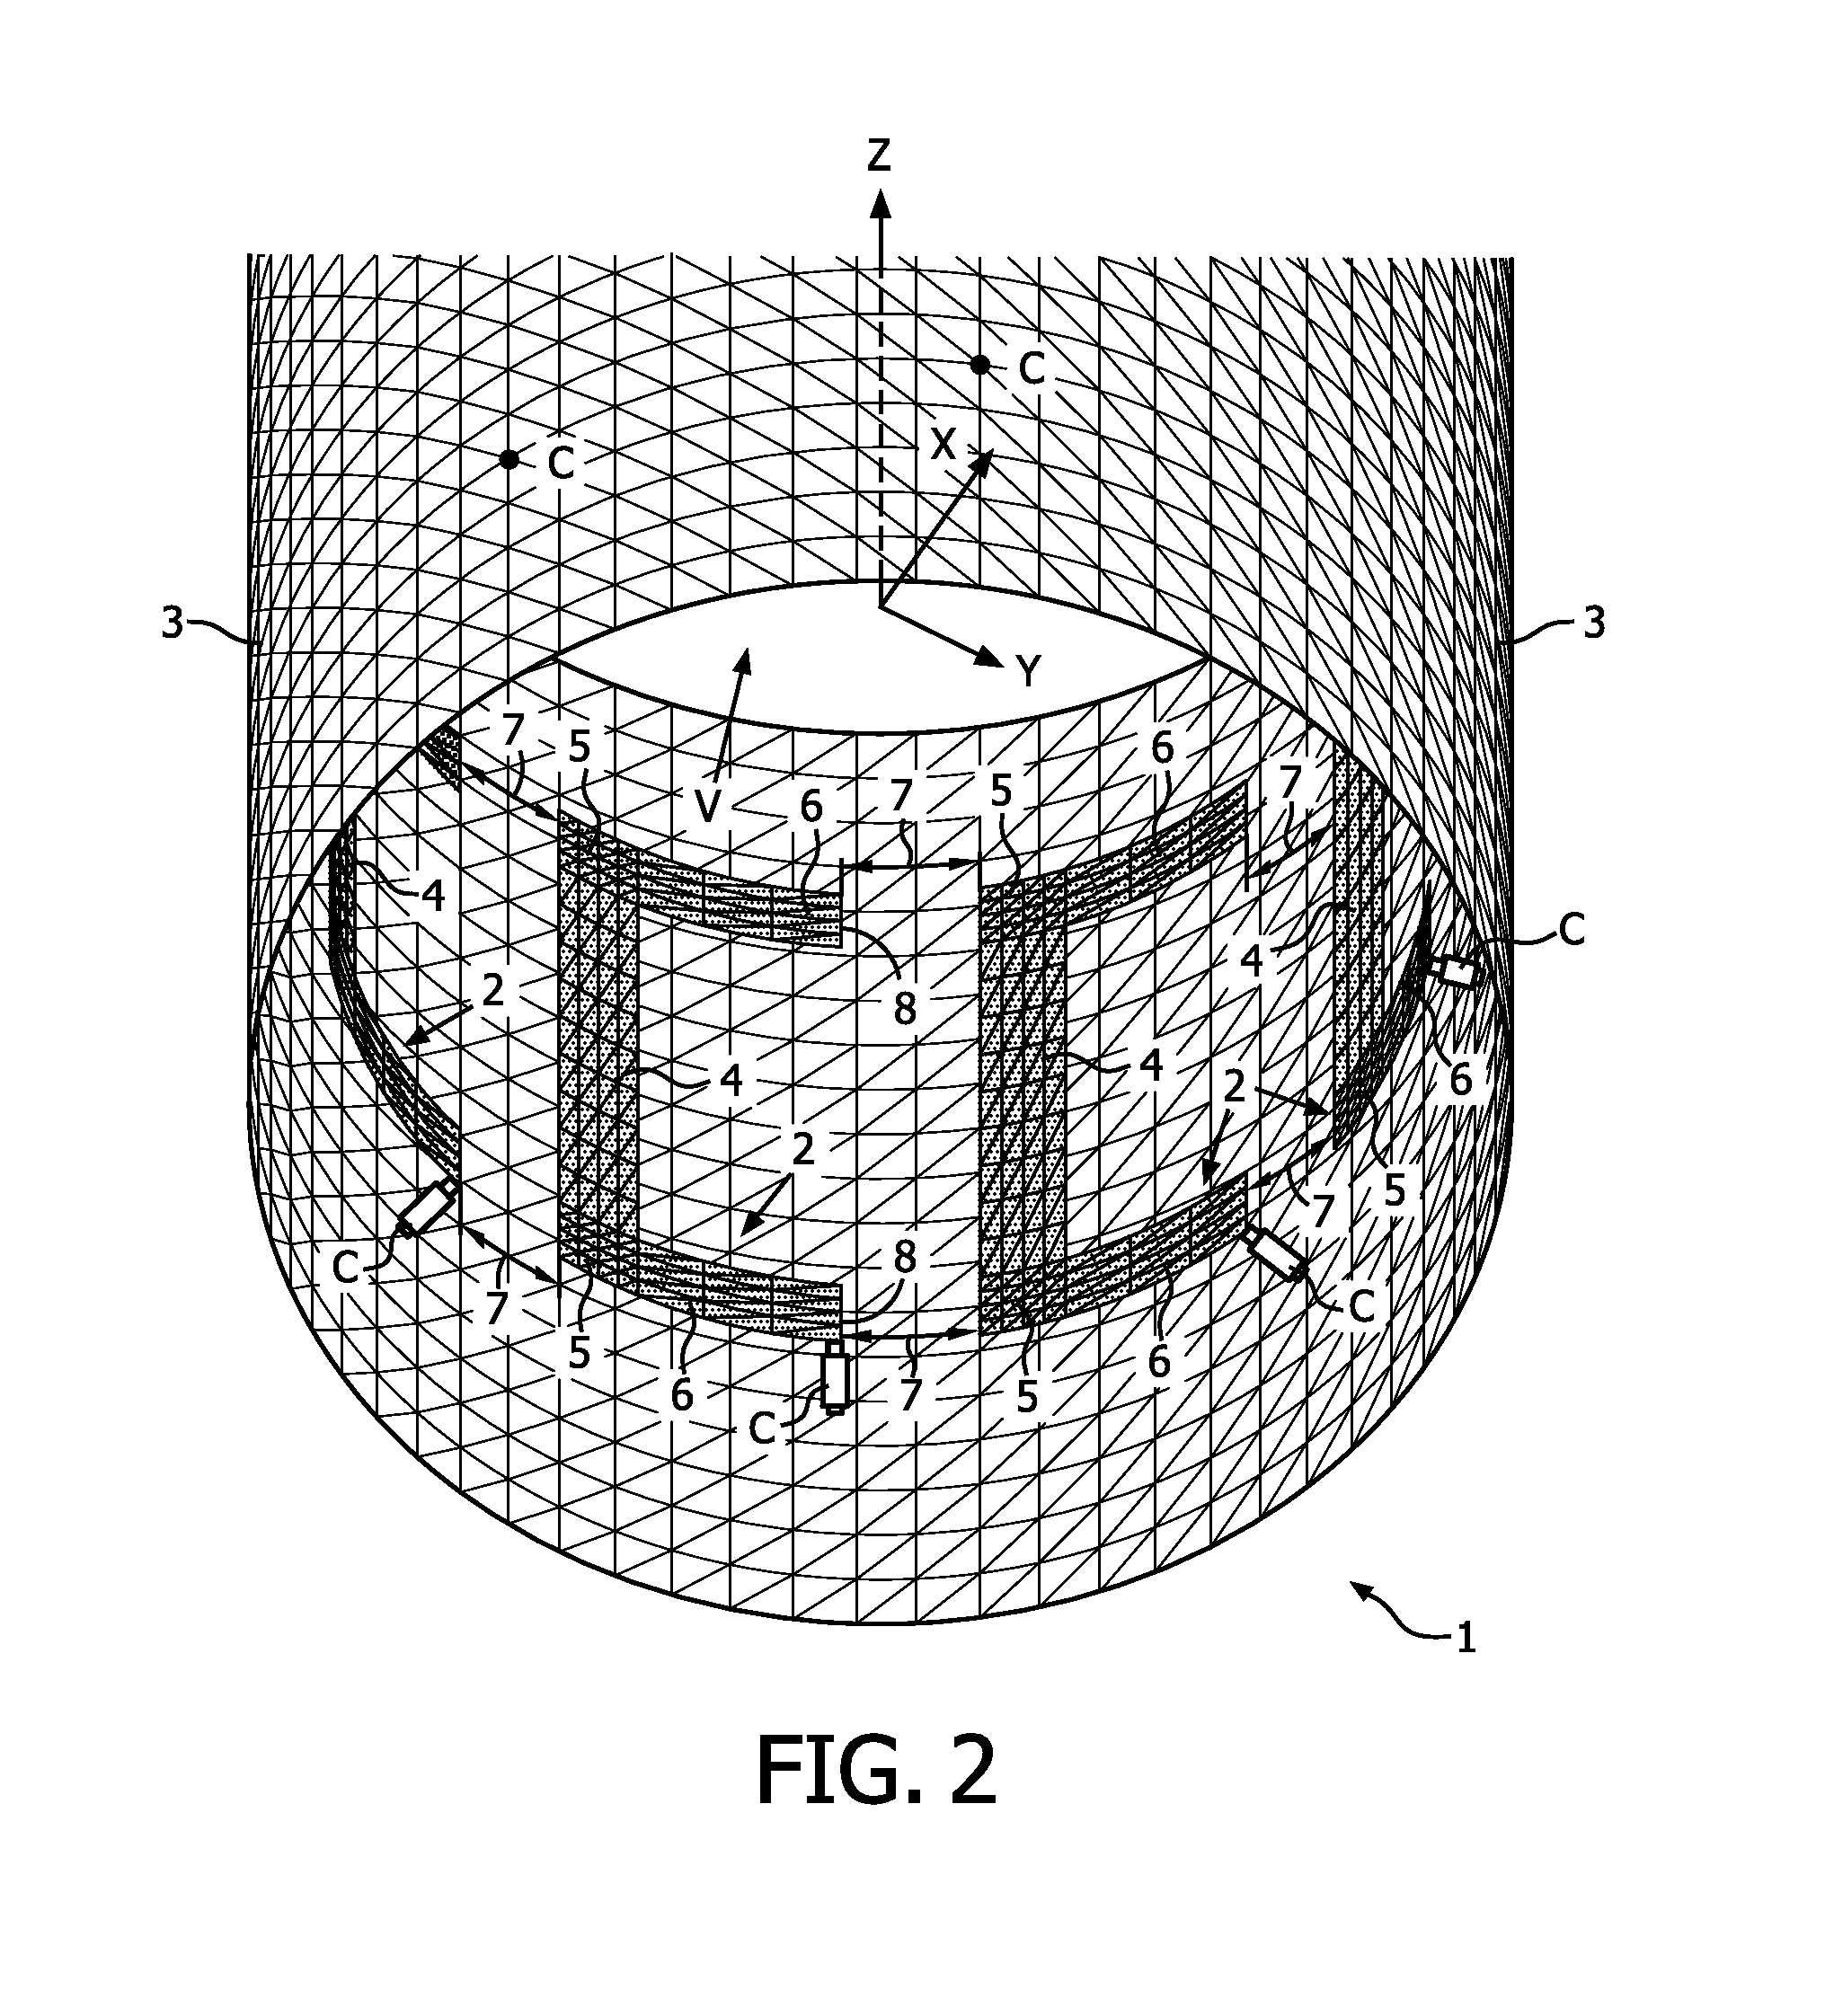 Transverse-electromagnetic (TEM) radio-frequency coil for magnetic resonance